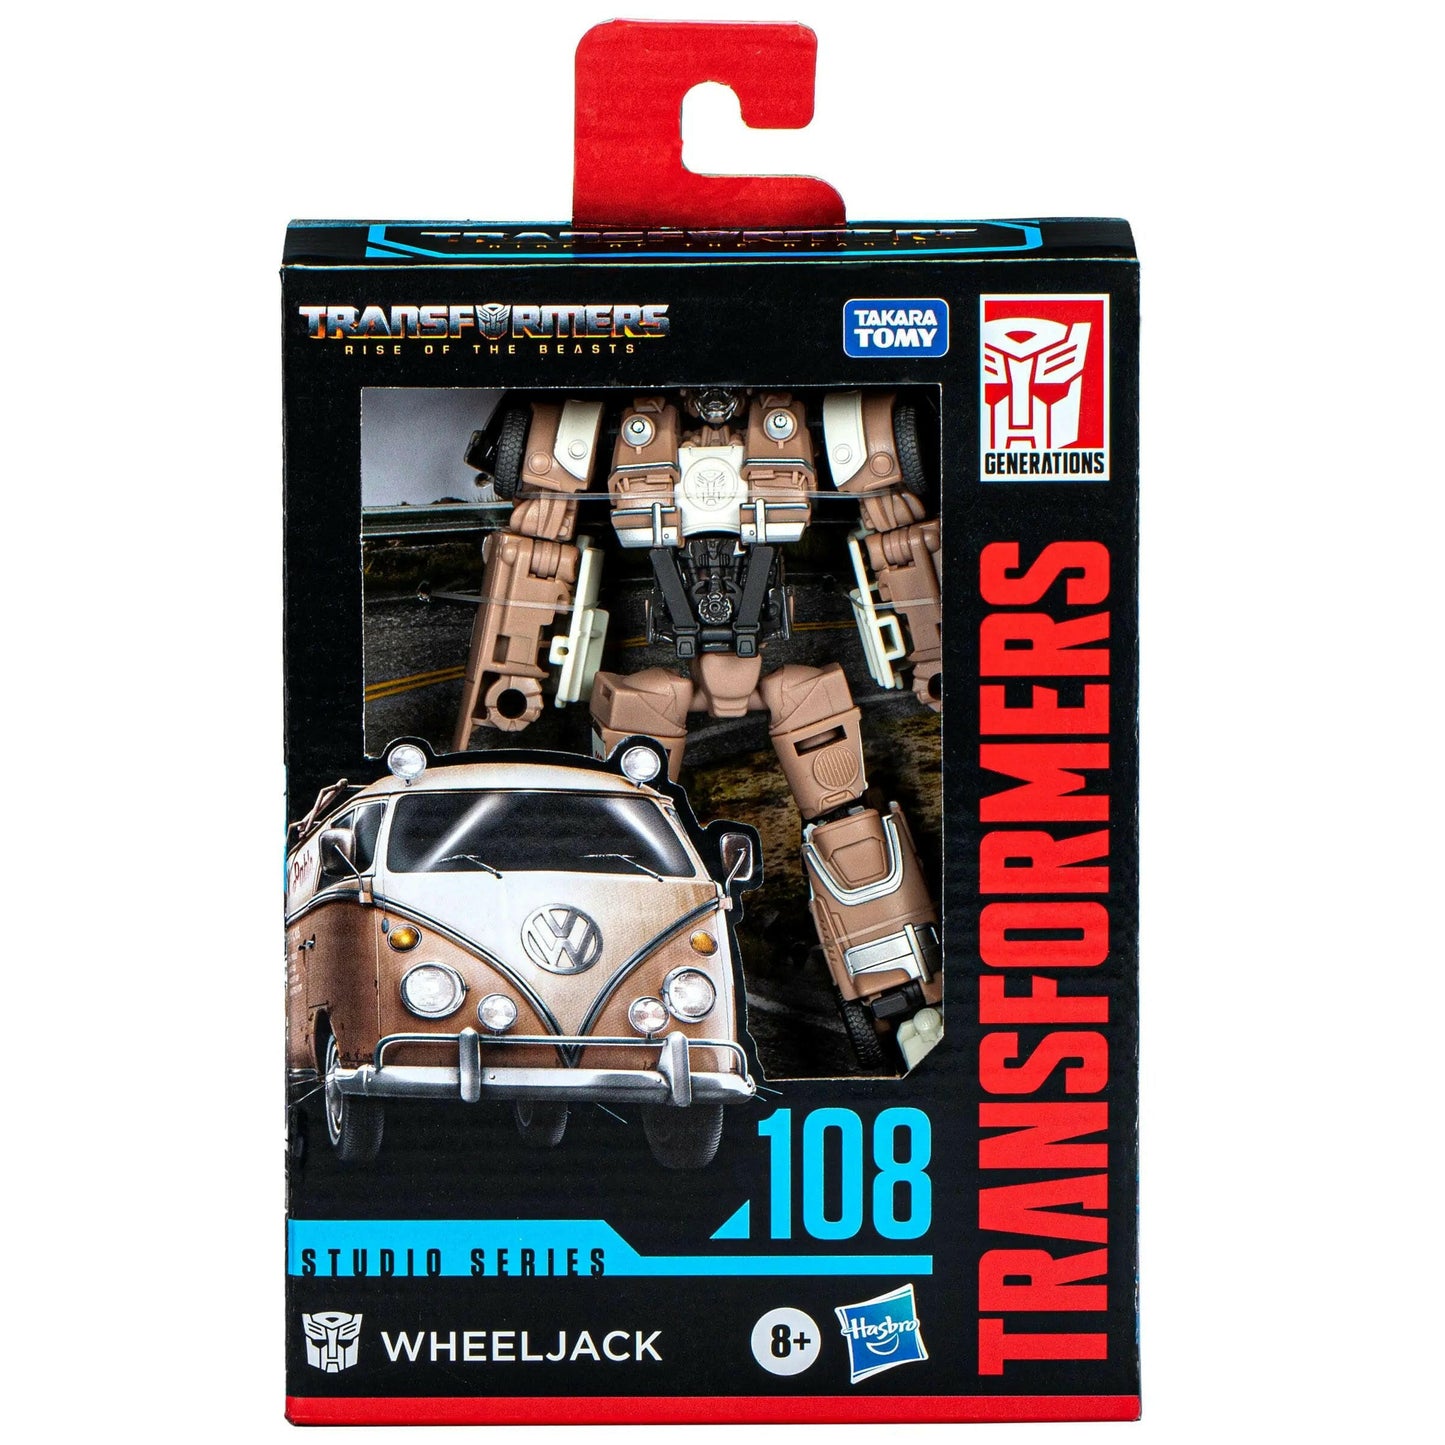 Pre-Order! Transformers: Rise of the Beasts Generations Studio Series Deluxe Class Actionfigur 108 Wheeljack 11cm Hasbro